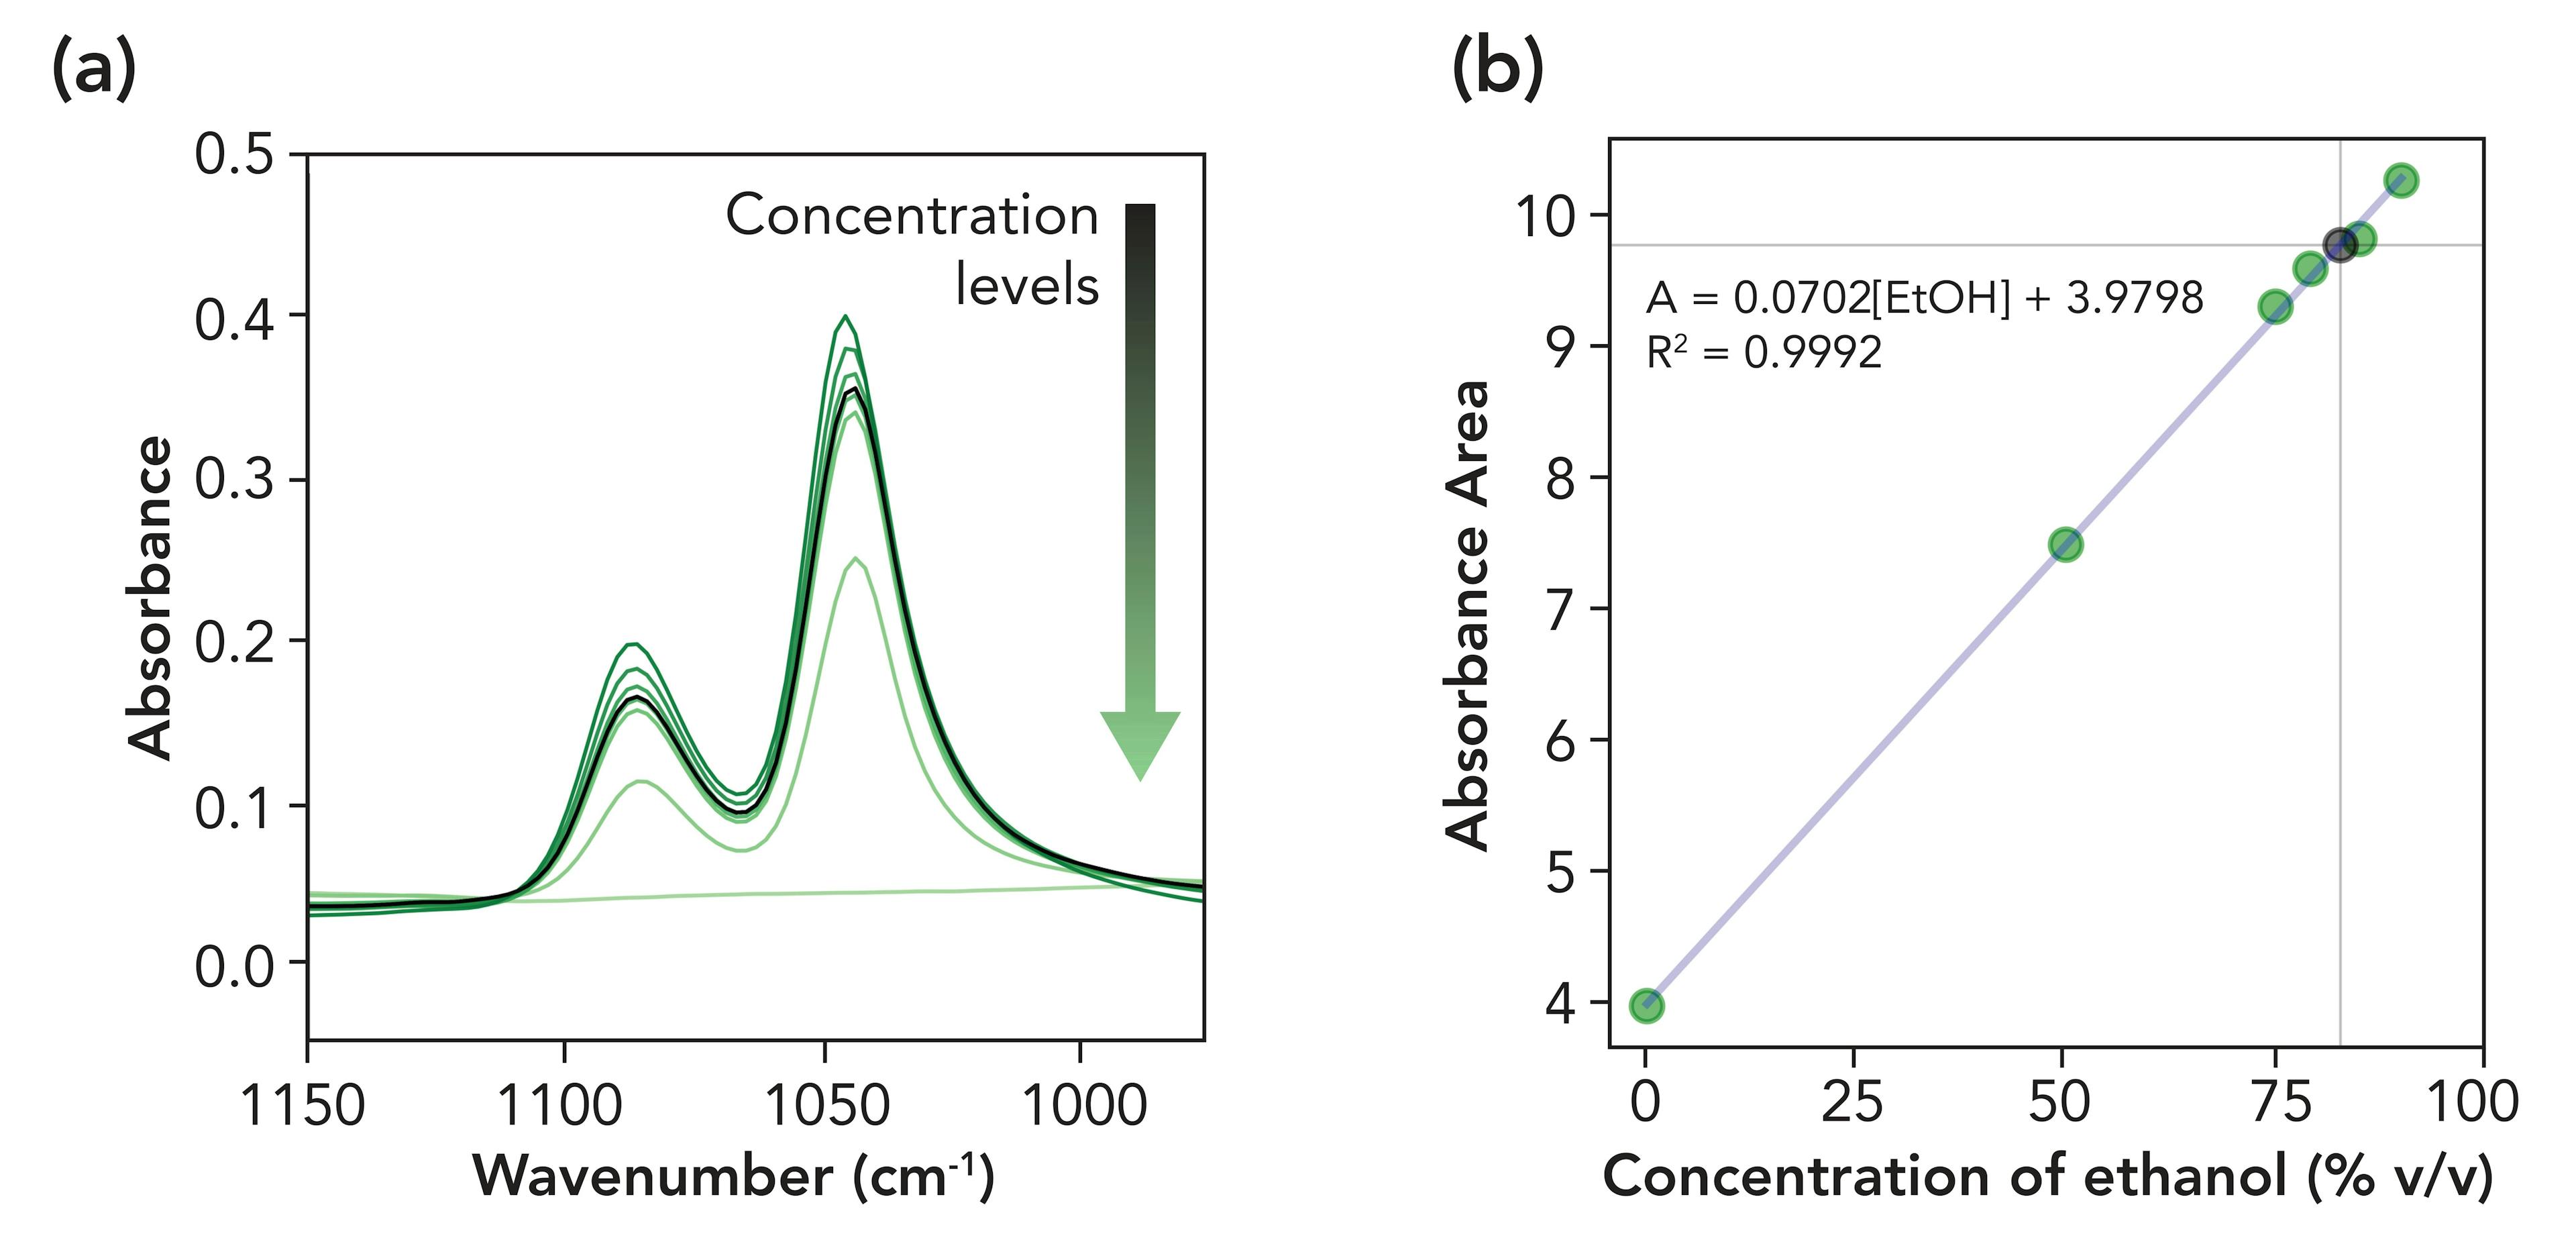 Figure 1: (a) Absorbance spectra of ethanol/water standards (green lines) and the analyzed hand sanitizer (black line). (b) Calibration plot showing the area of the absorbance bands of ethanol (green markers) with the absorbance area of the hand sanitizer shown by the black marker.